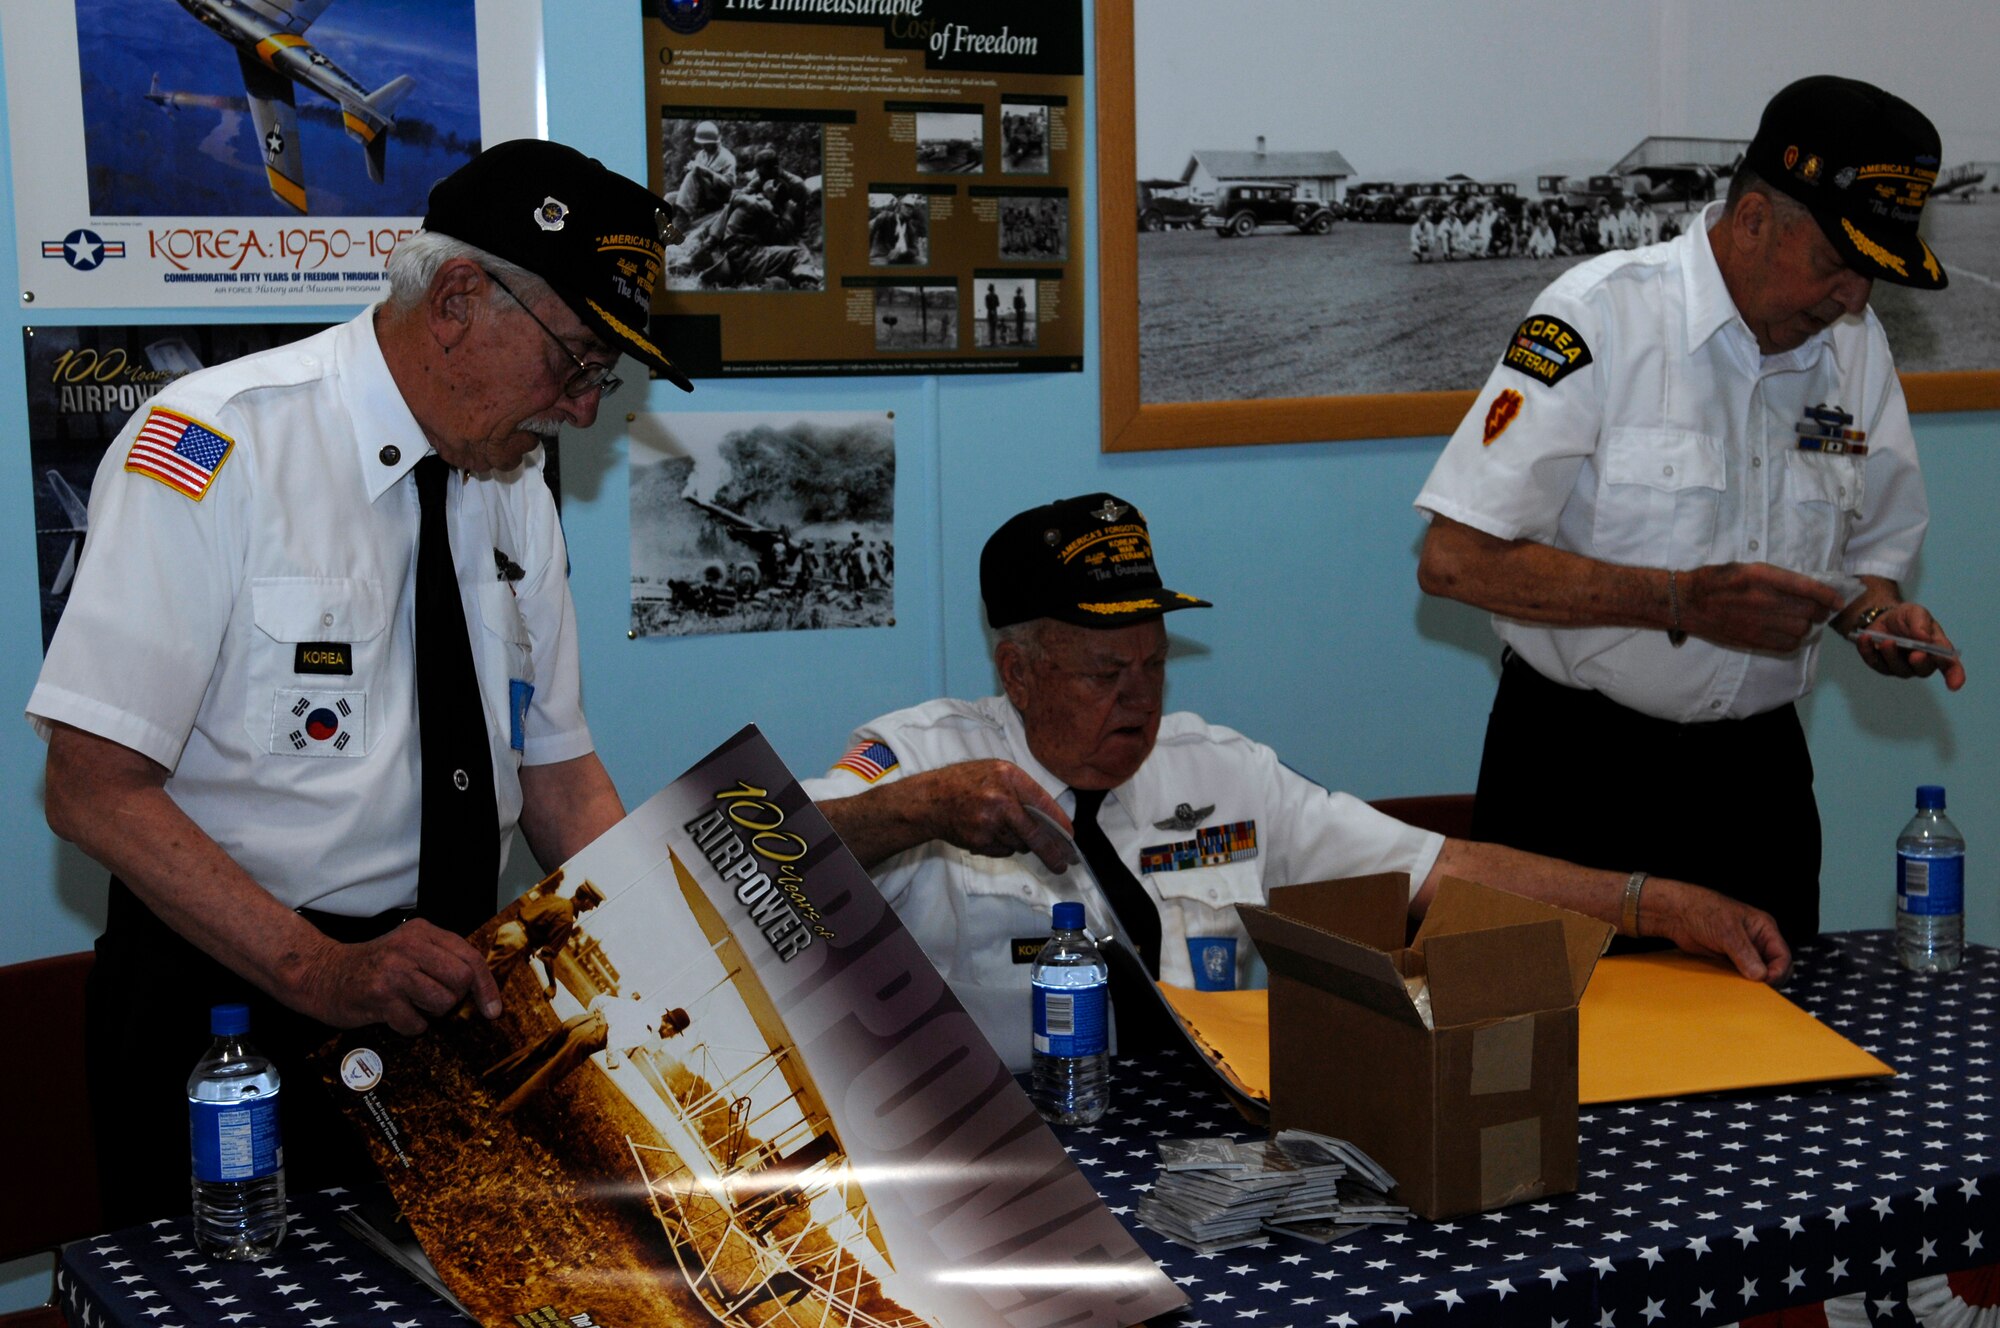 (left to right) Korean War veterans Al Skidmore, retired  Lt. Col. Jerry Teachout and retired Army Master Sgt. Robert Hempel prepare to share their combat experiences for the Korean War exhibit at the South Dakota Air and Space Museum June 25. The veterans are from the local chapter of Korean War Veterans Association and added a human element to the display, which commemorates the 58th anniversary of the hostilities on the Korean peninsula. (U.S. Air Force photo/Airman Matthew Flynn)